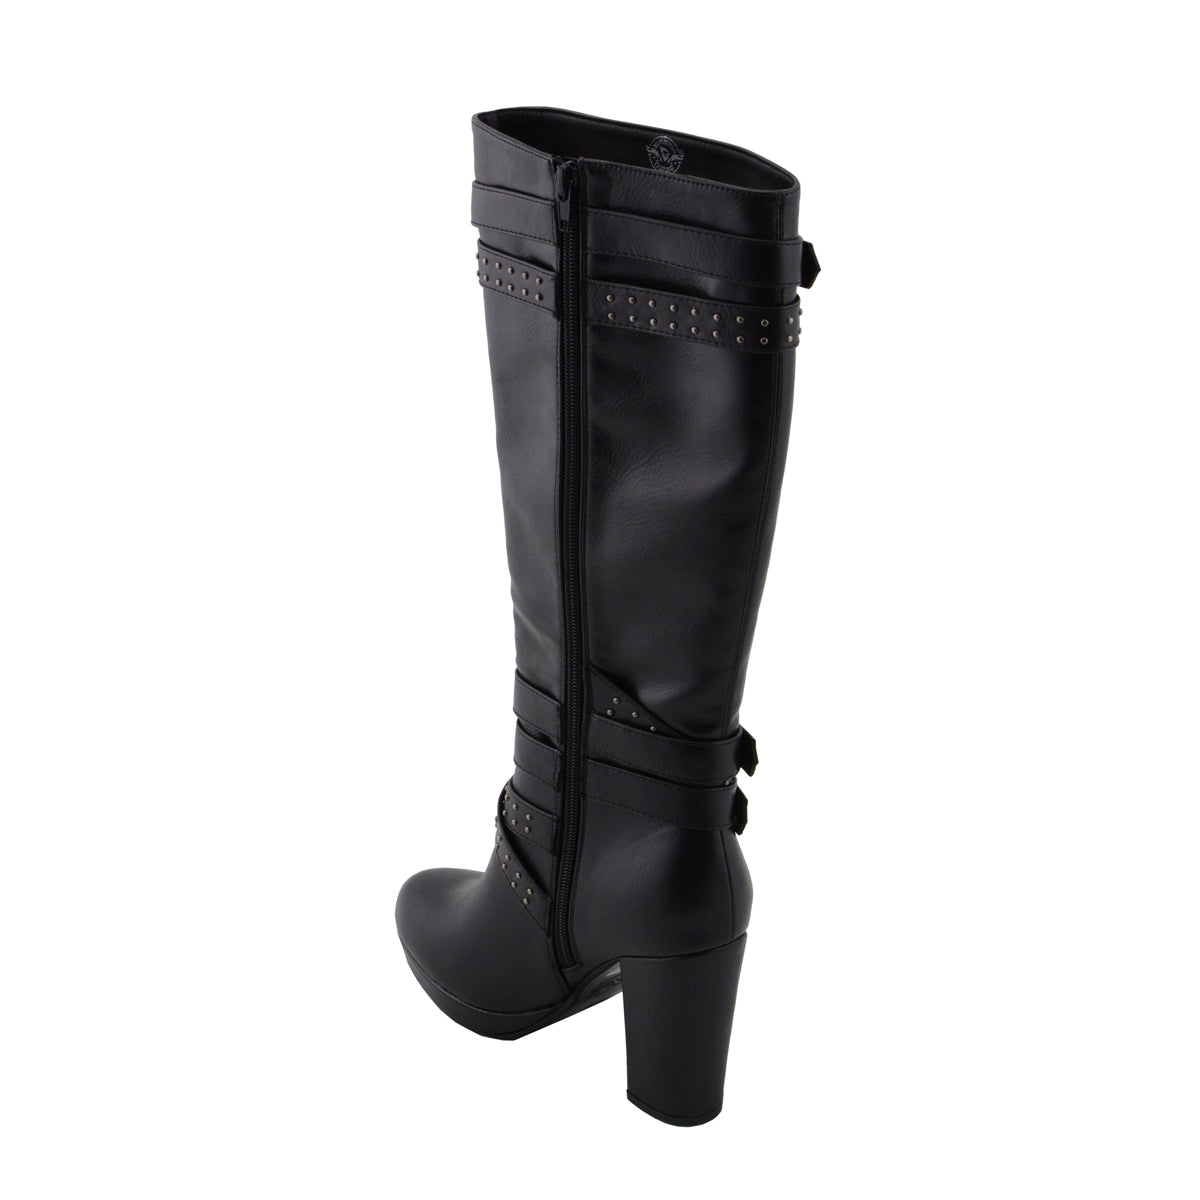 Womens Tall Black Studded Strap Boots with Platform Heel